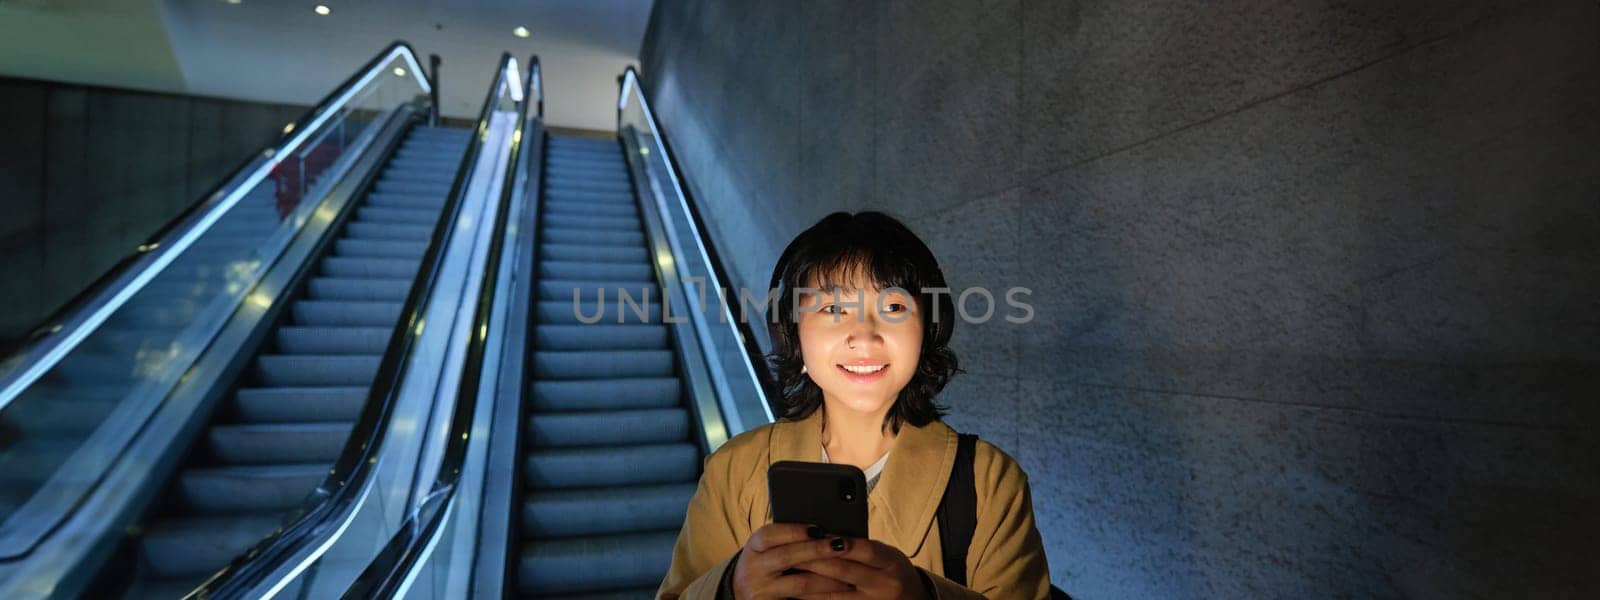 Cute young woman going down the escalator to the tube, using subway metro to commute to work or university, standing with smartphone.